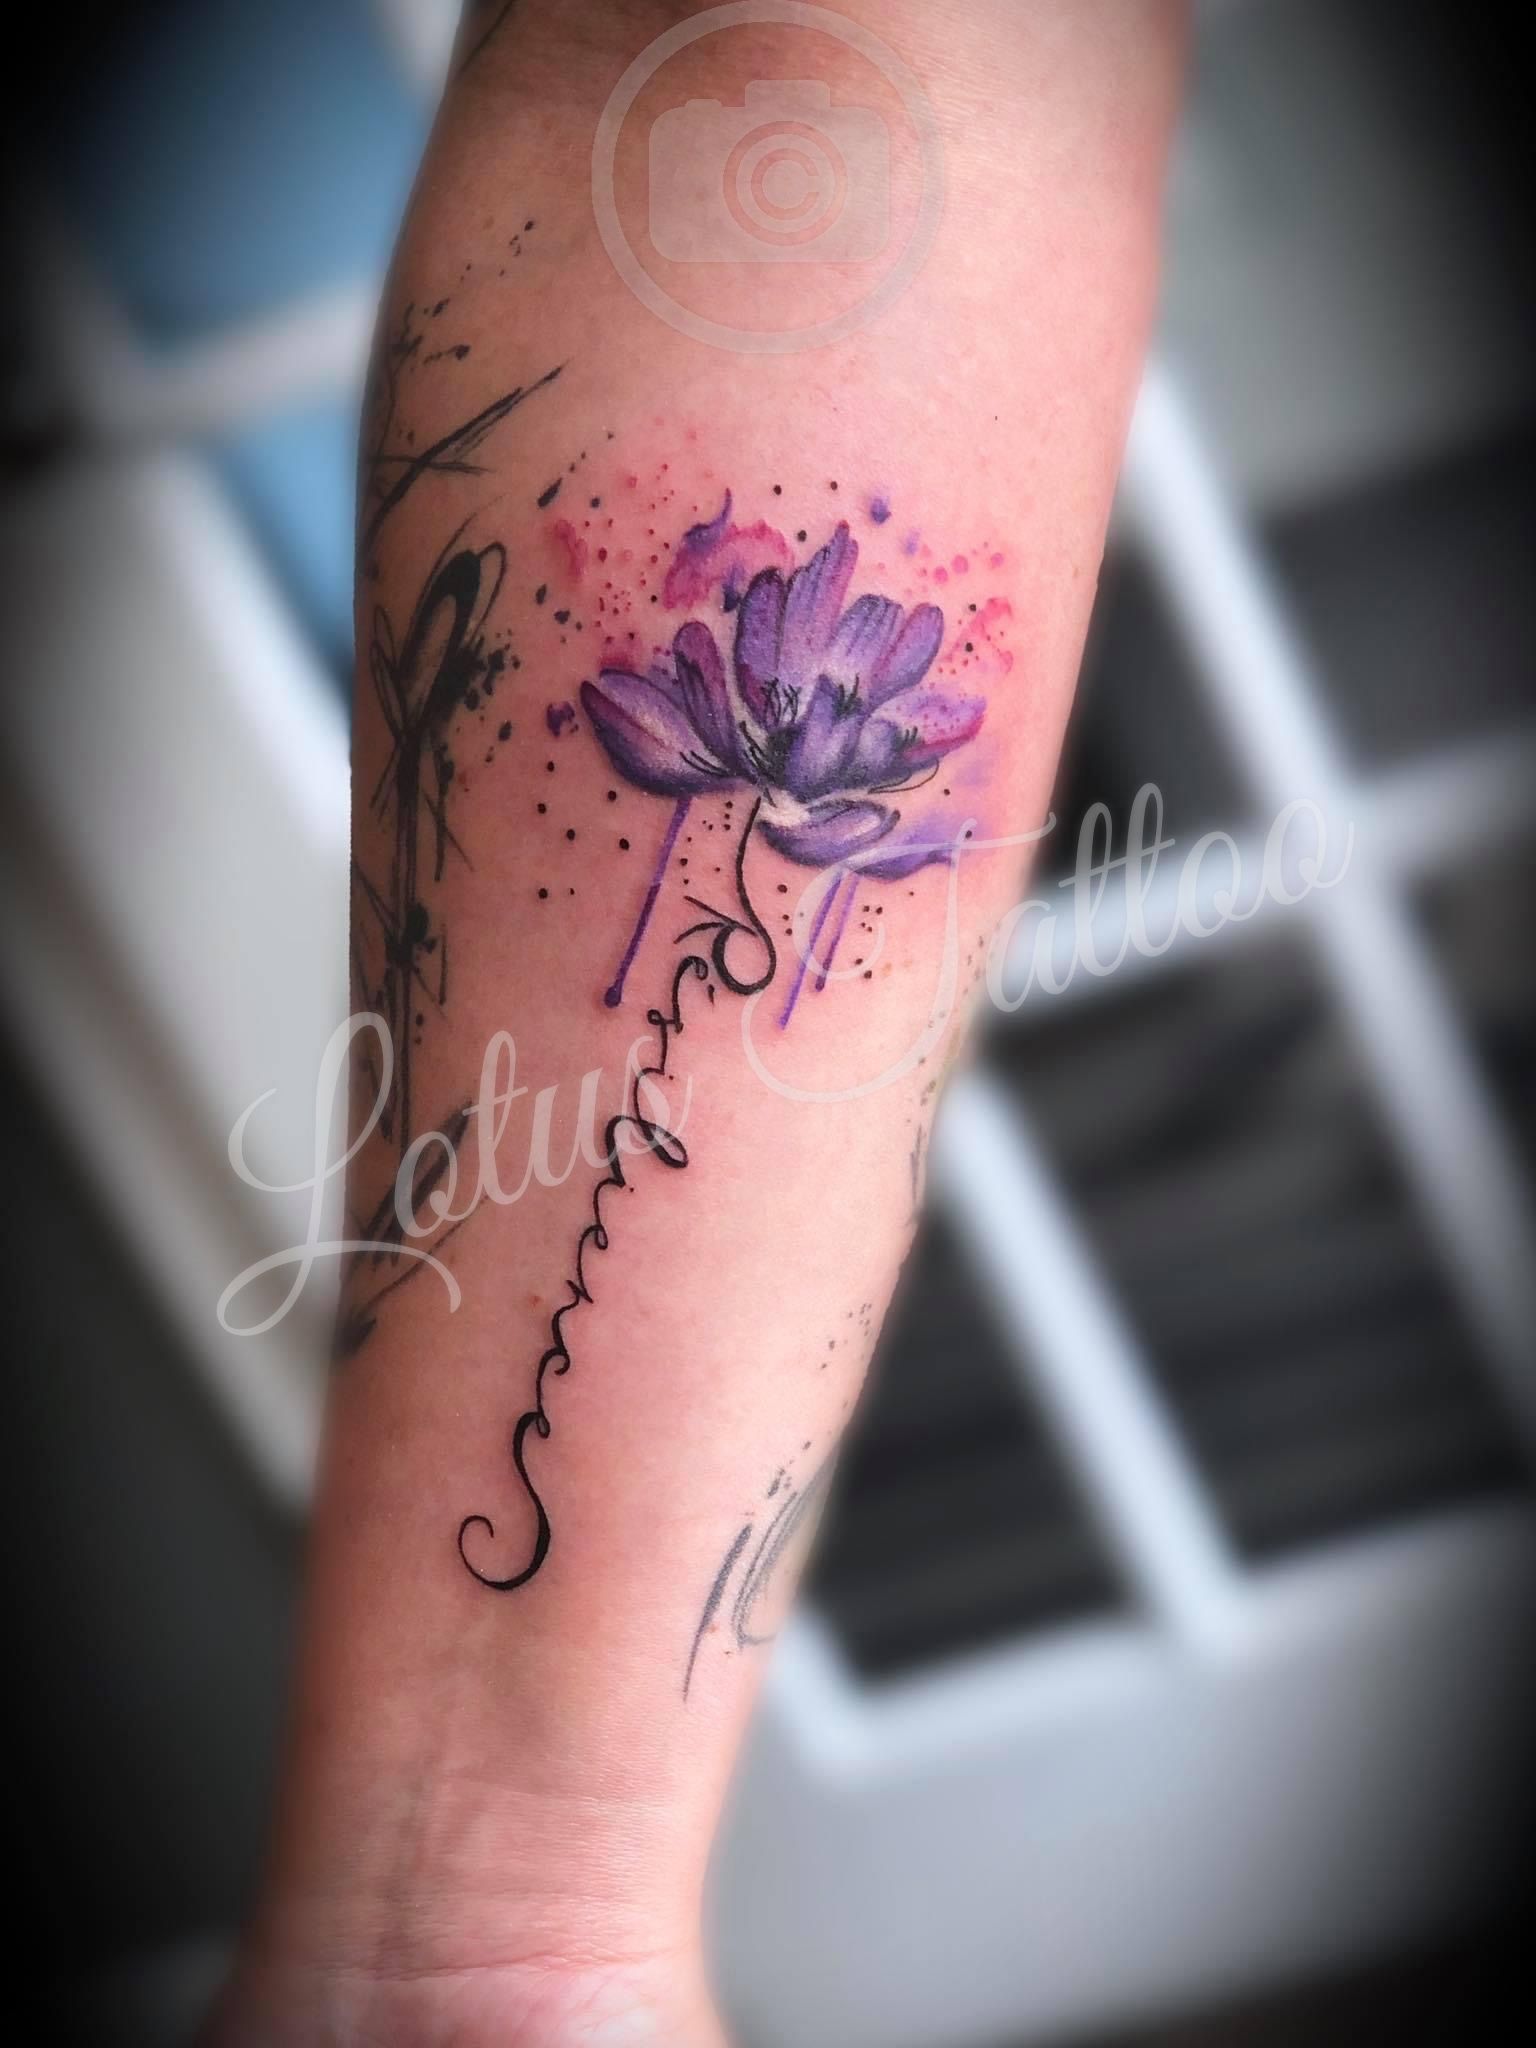 Violet flowers and kanji tattoo  Tattoo by Elijah Pashby T  Flickr